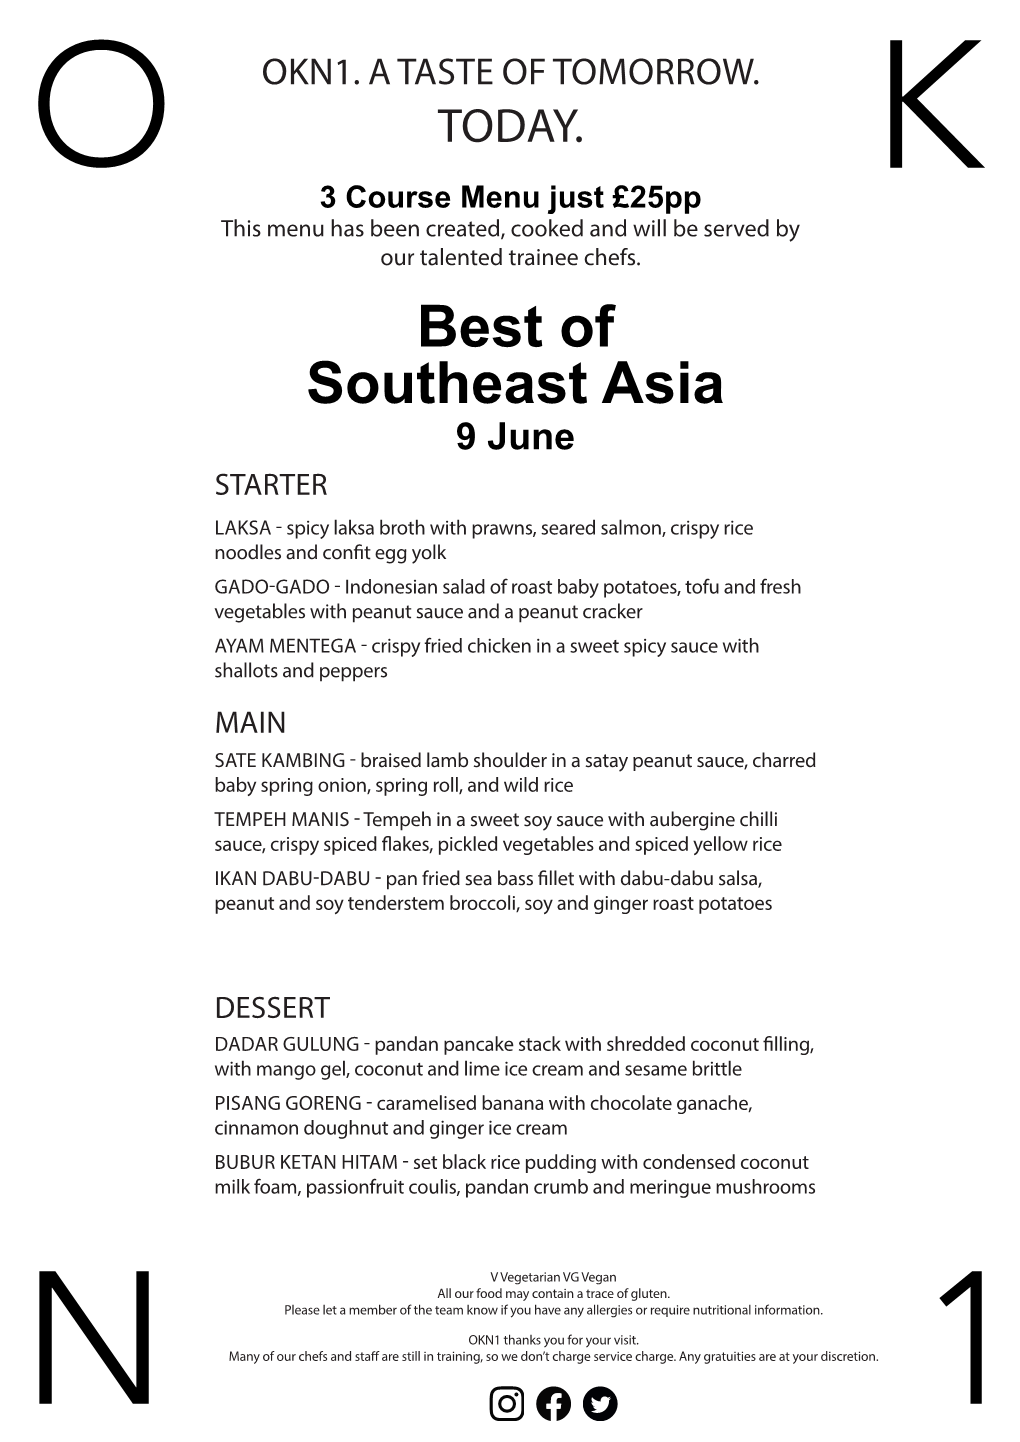 Best of Southeast Asia